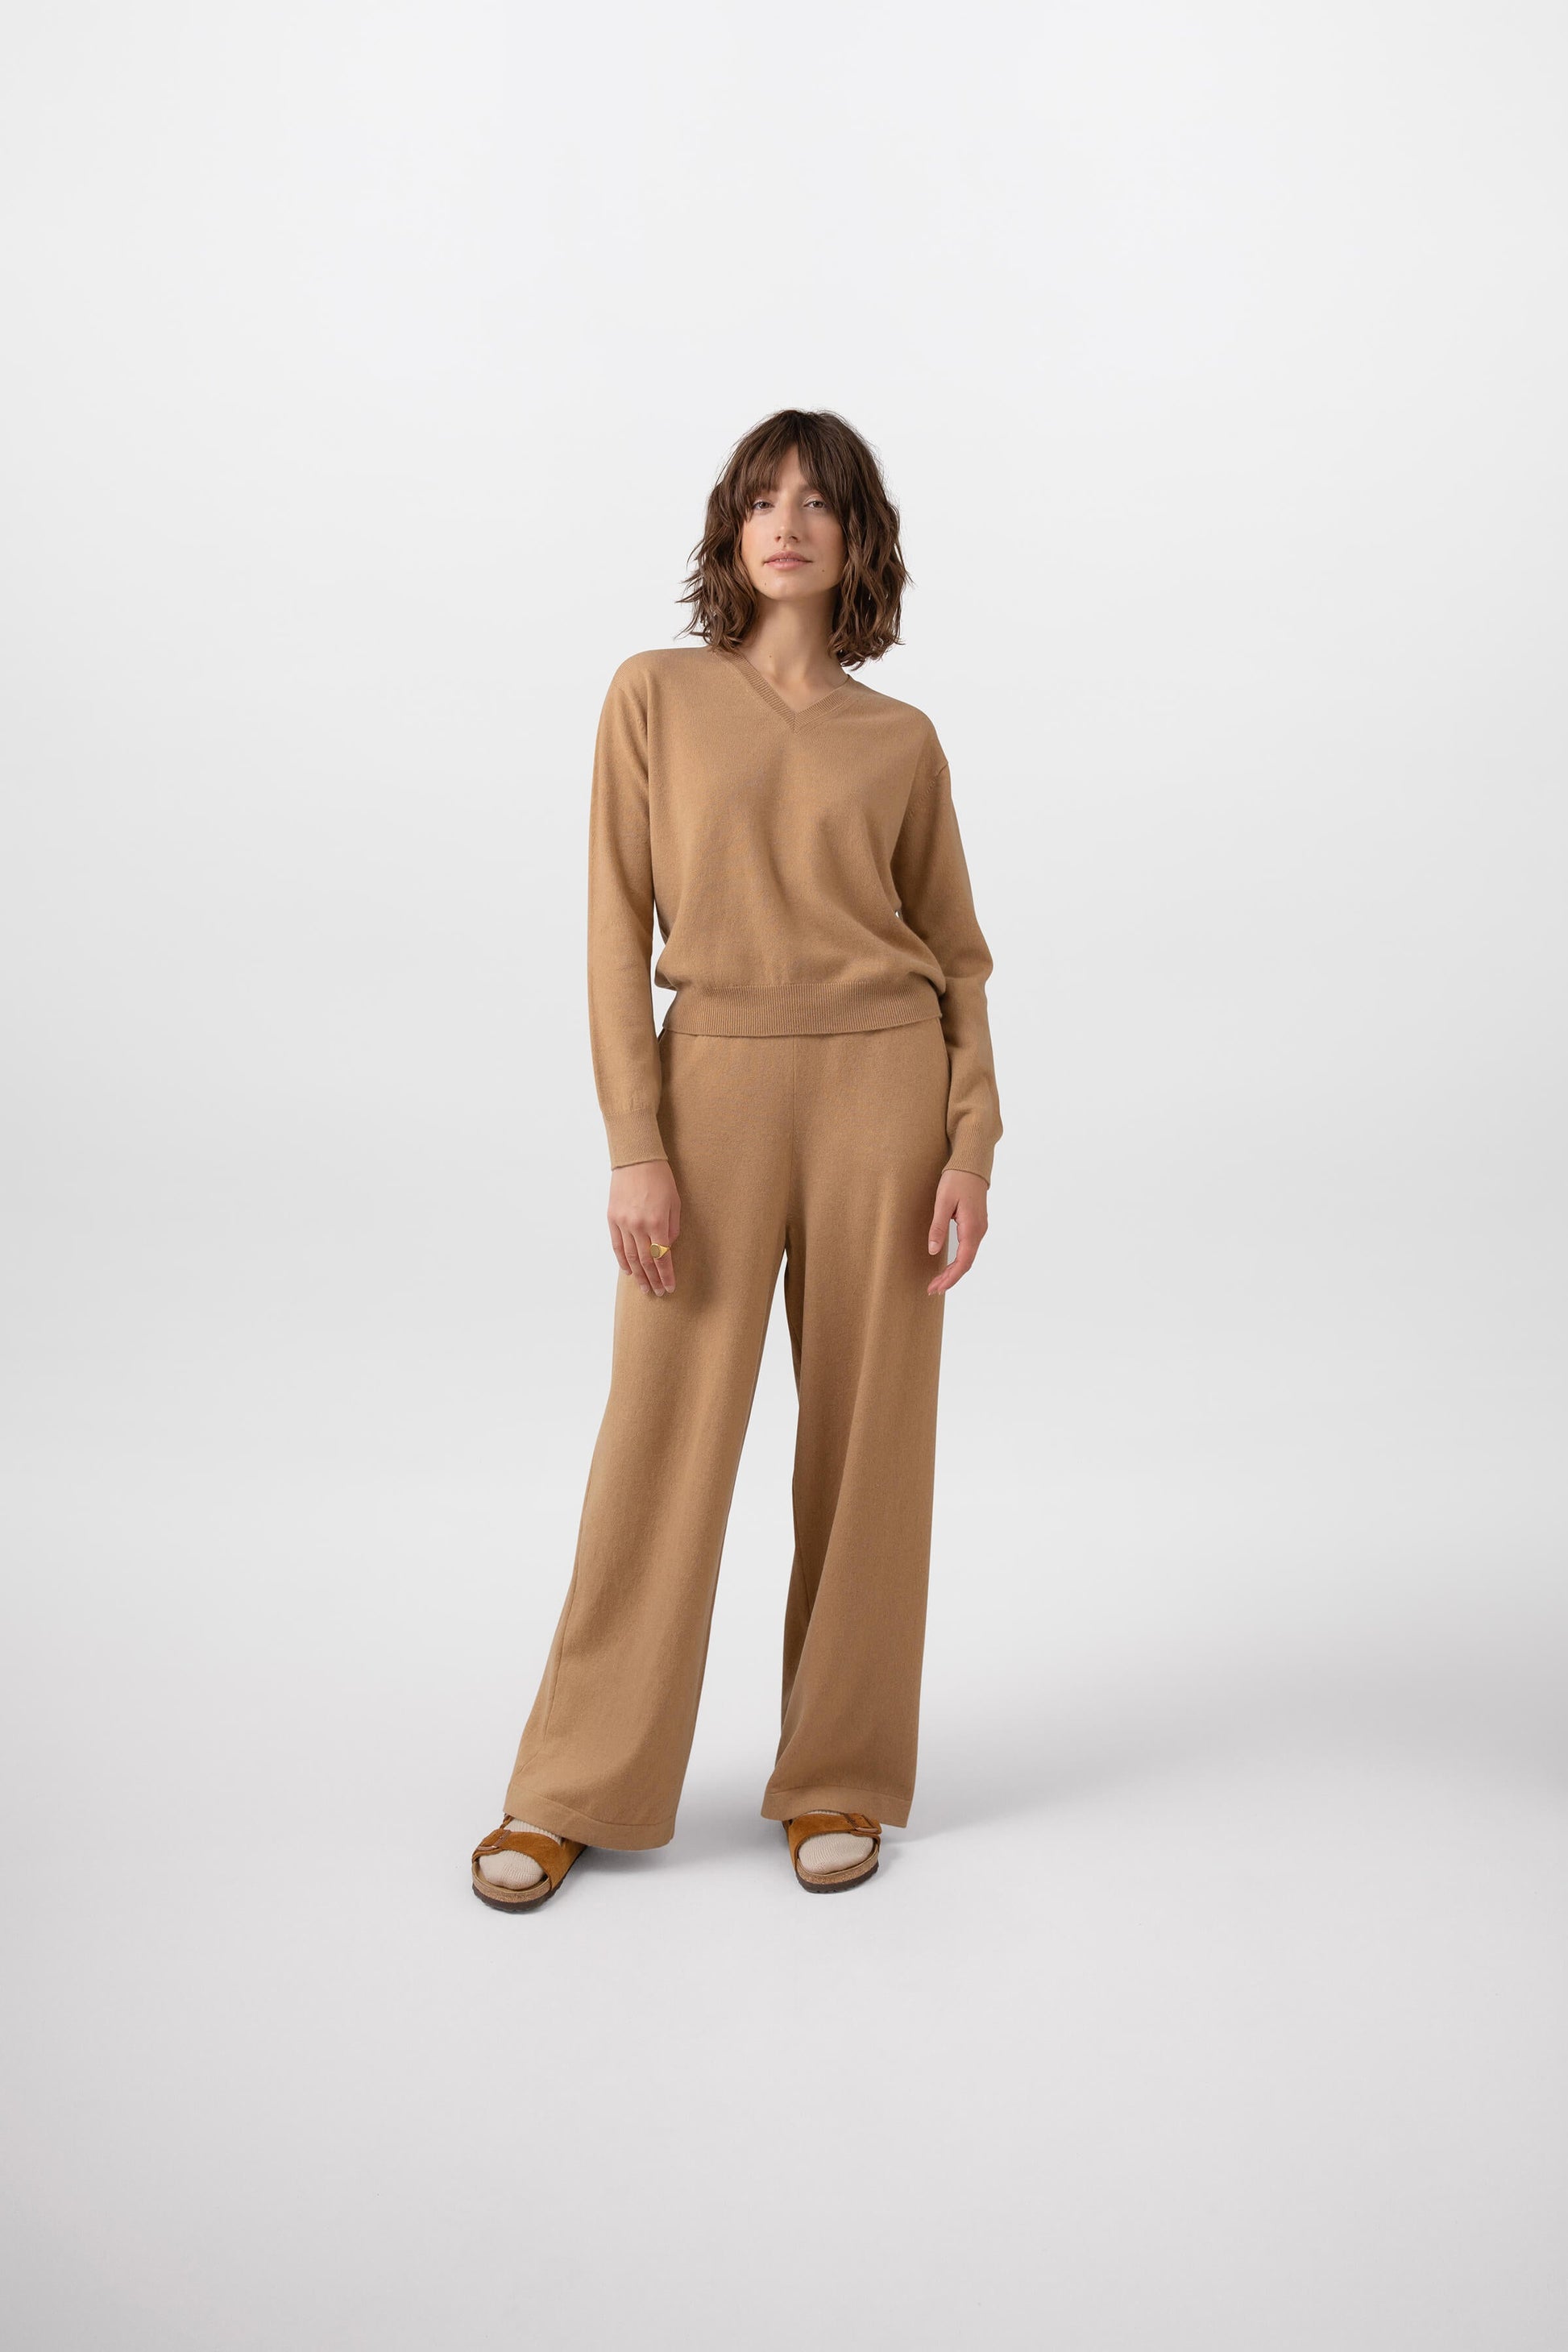 Johnstons of Elgin Knitted Cashmere Women's High Rise Wide Leg Trousers in Camel worn with a matching Cashmere Sweater on a grey background KBP00926HB4315